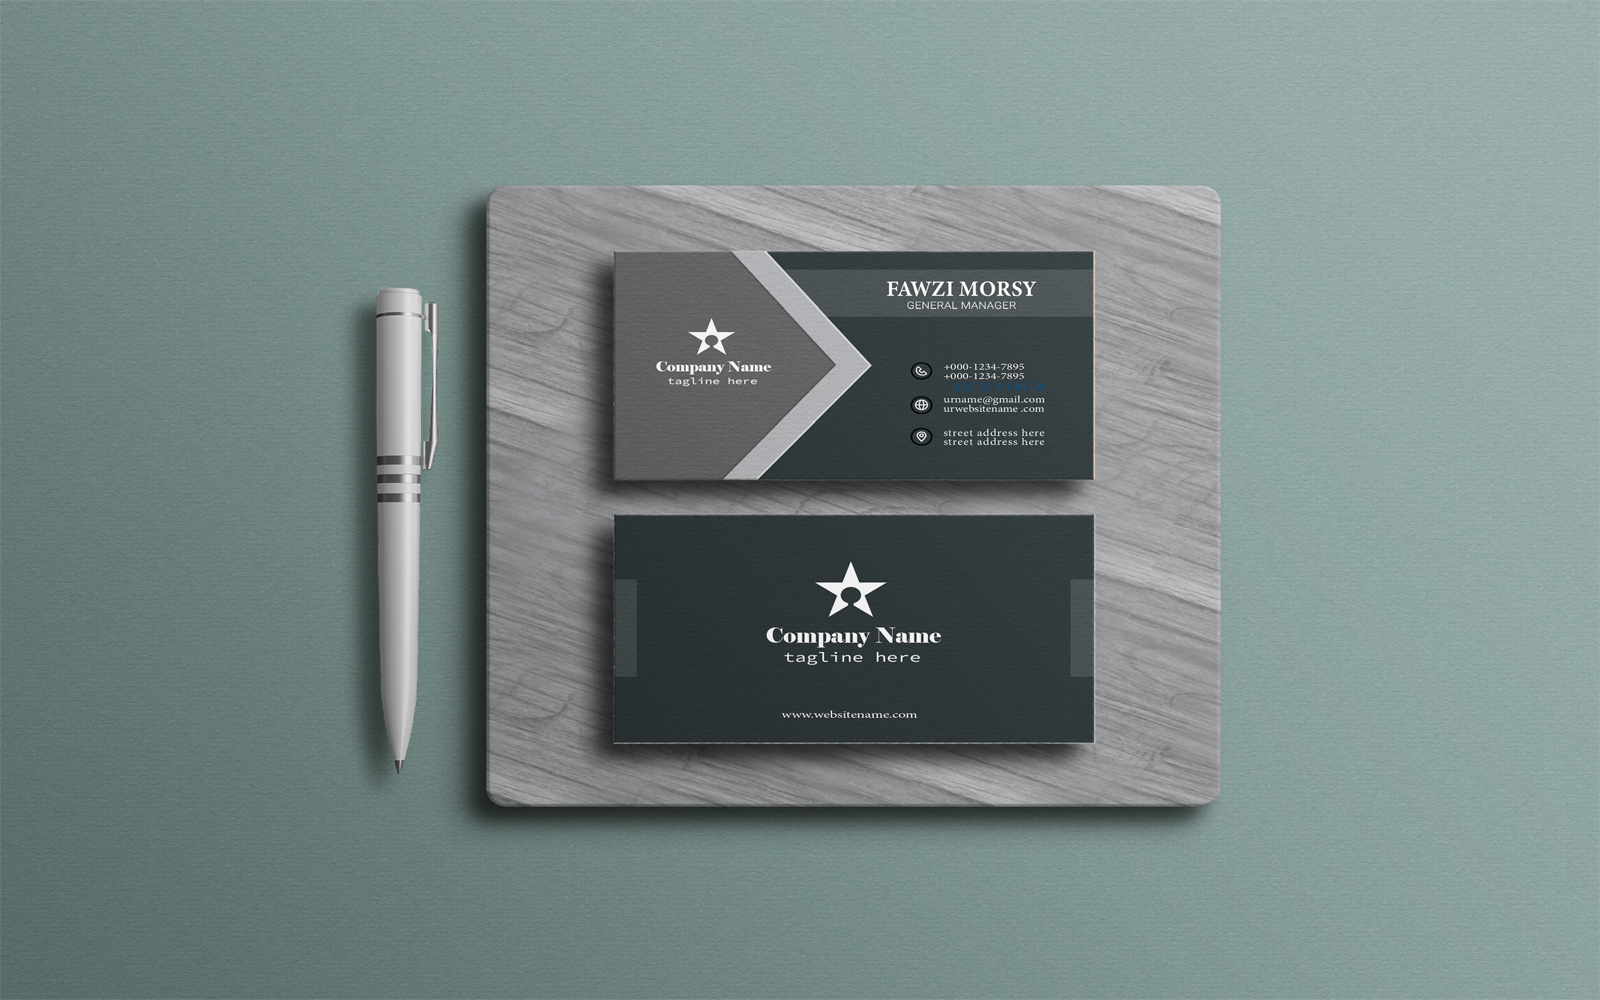 Black Business Card Design Template and Ready for Print